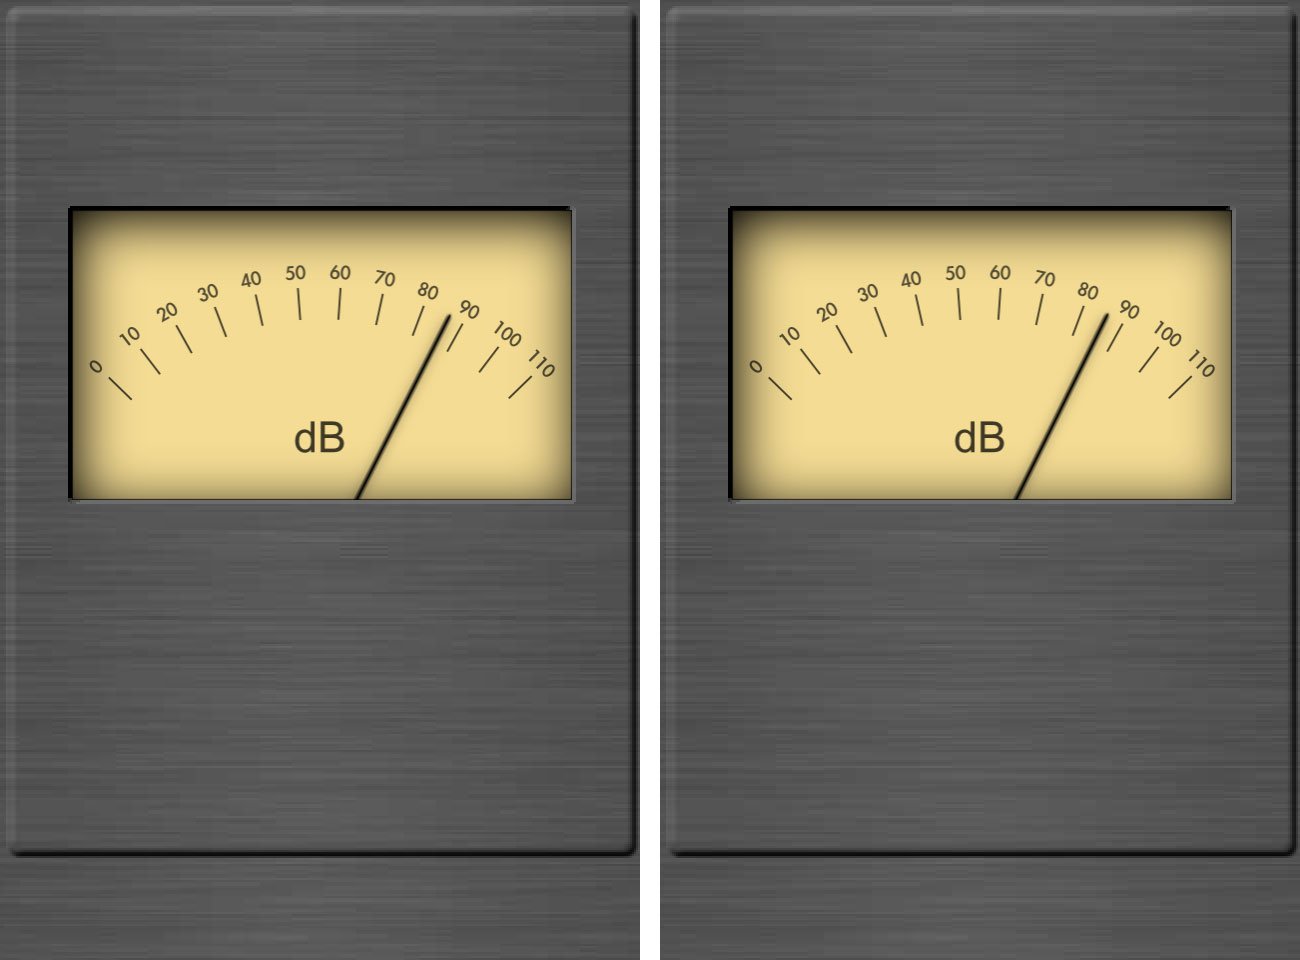 Using the Decibels app on my iPhone 4S, I measured both the new iPad and the iPad 2 and recorded nearly identical results